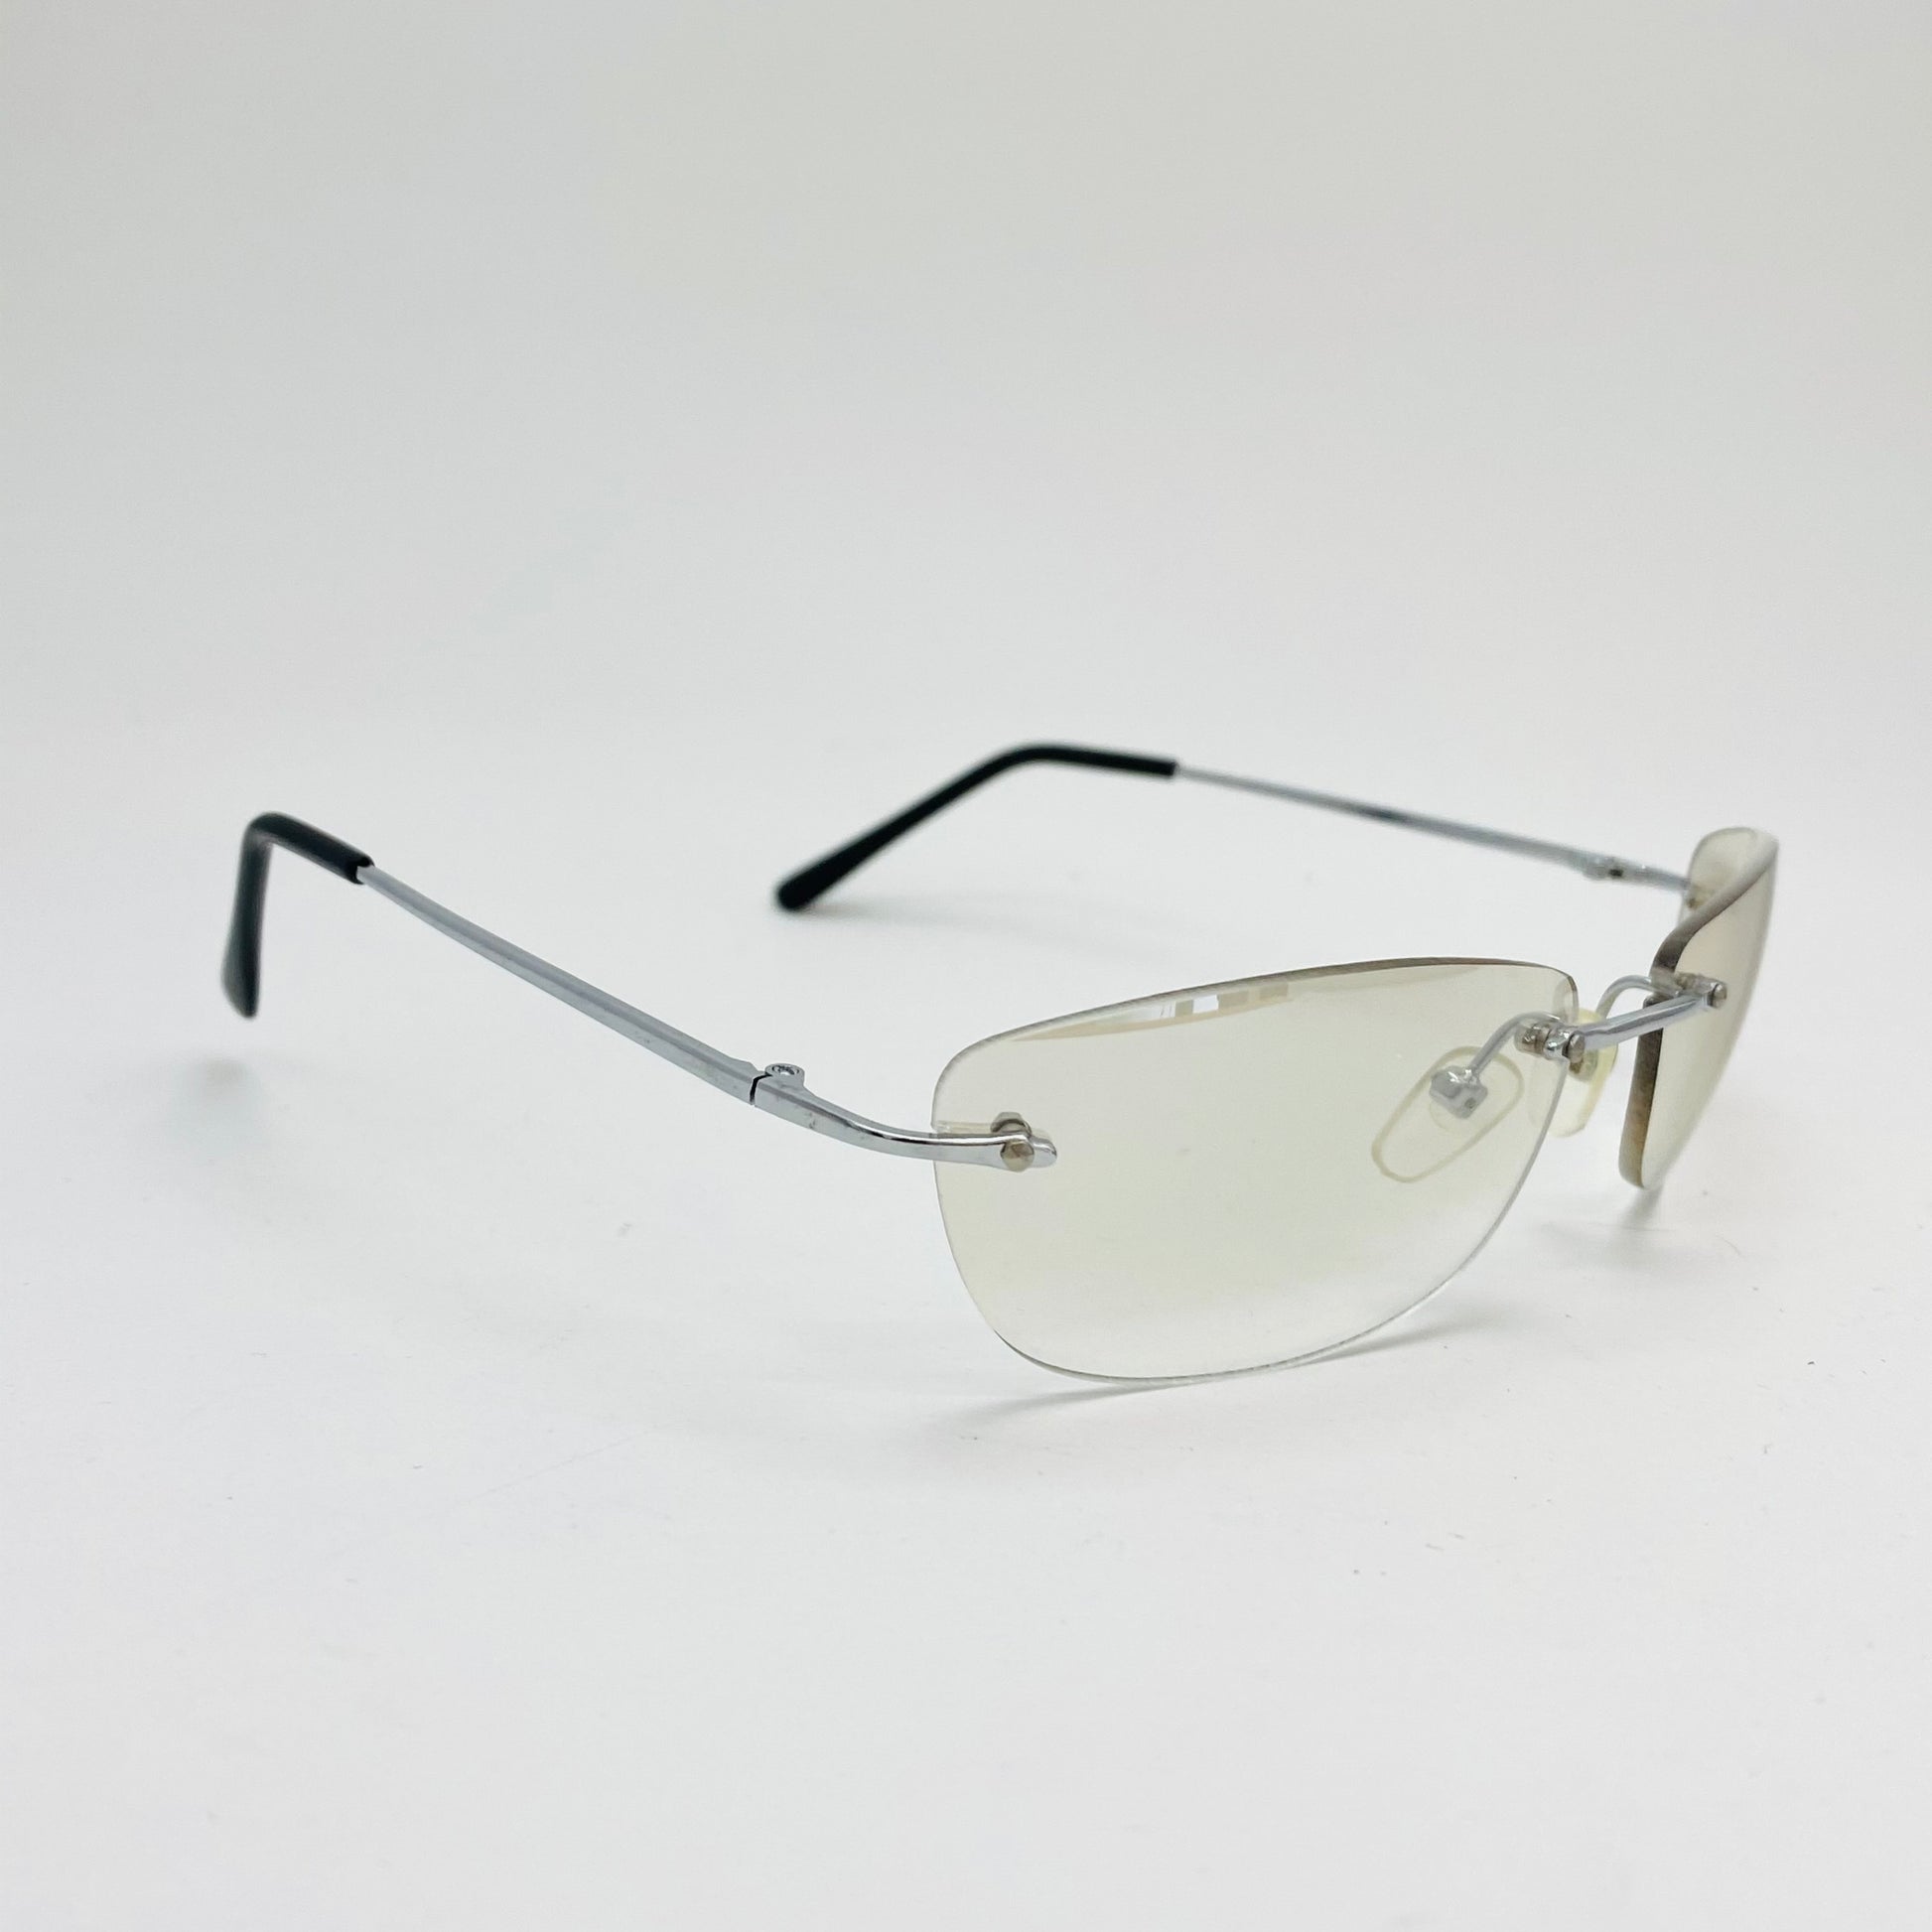 grunge style, clear lens, rimless frame, vintage sunglasses with silver color